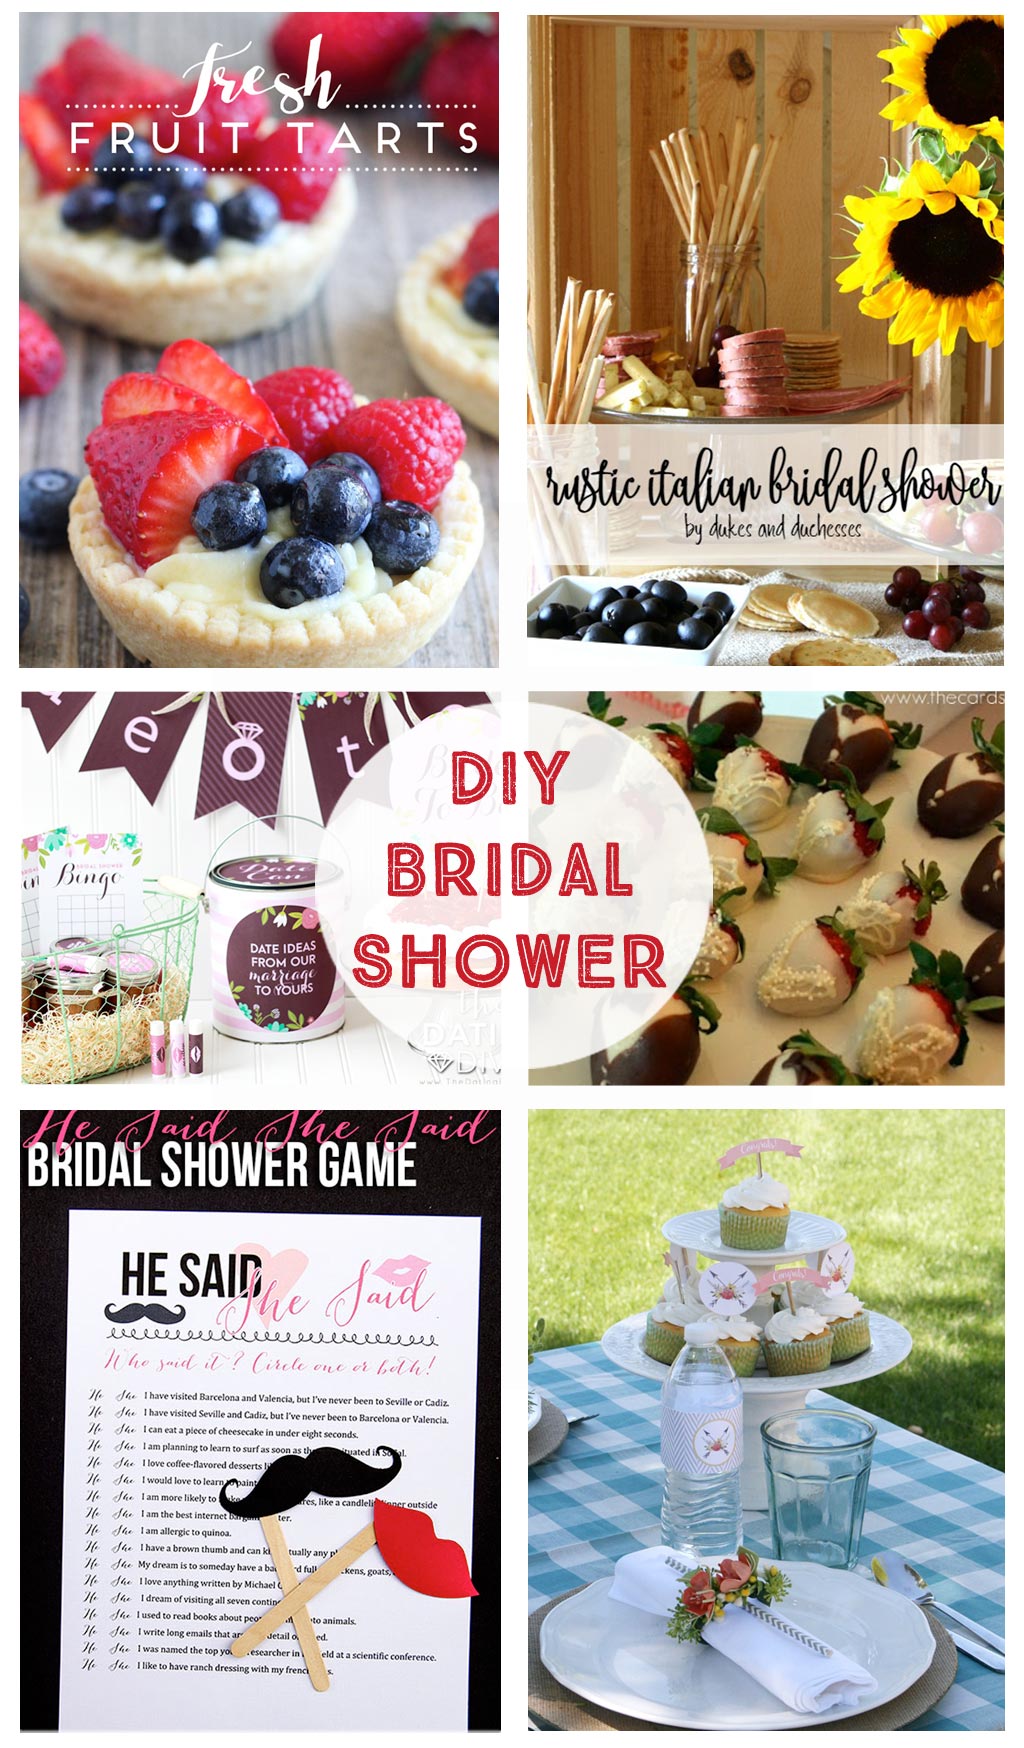 Best Bridal Shower Gifts - The Crafting Chicks